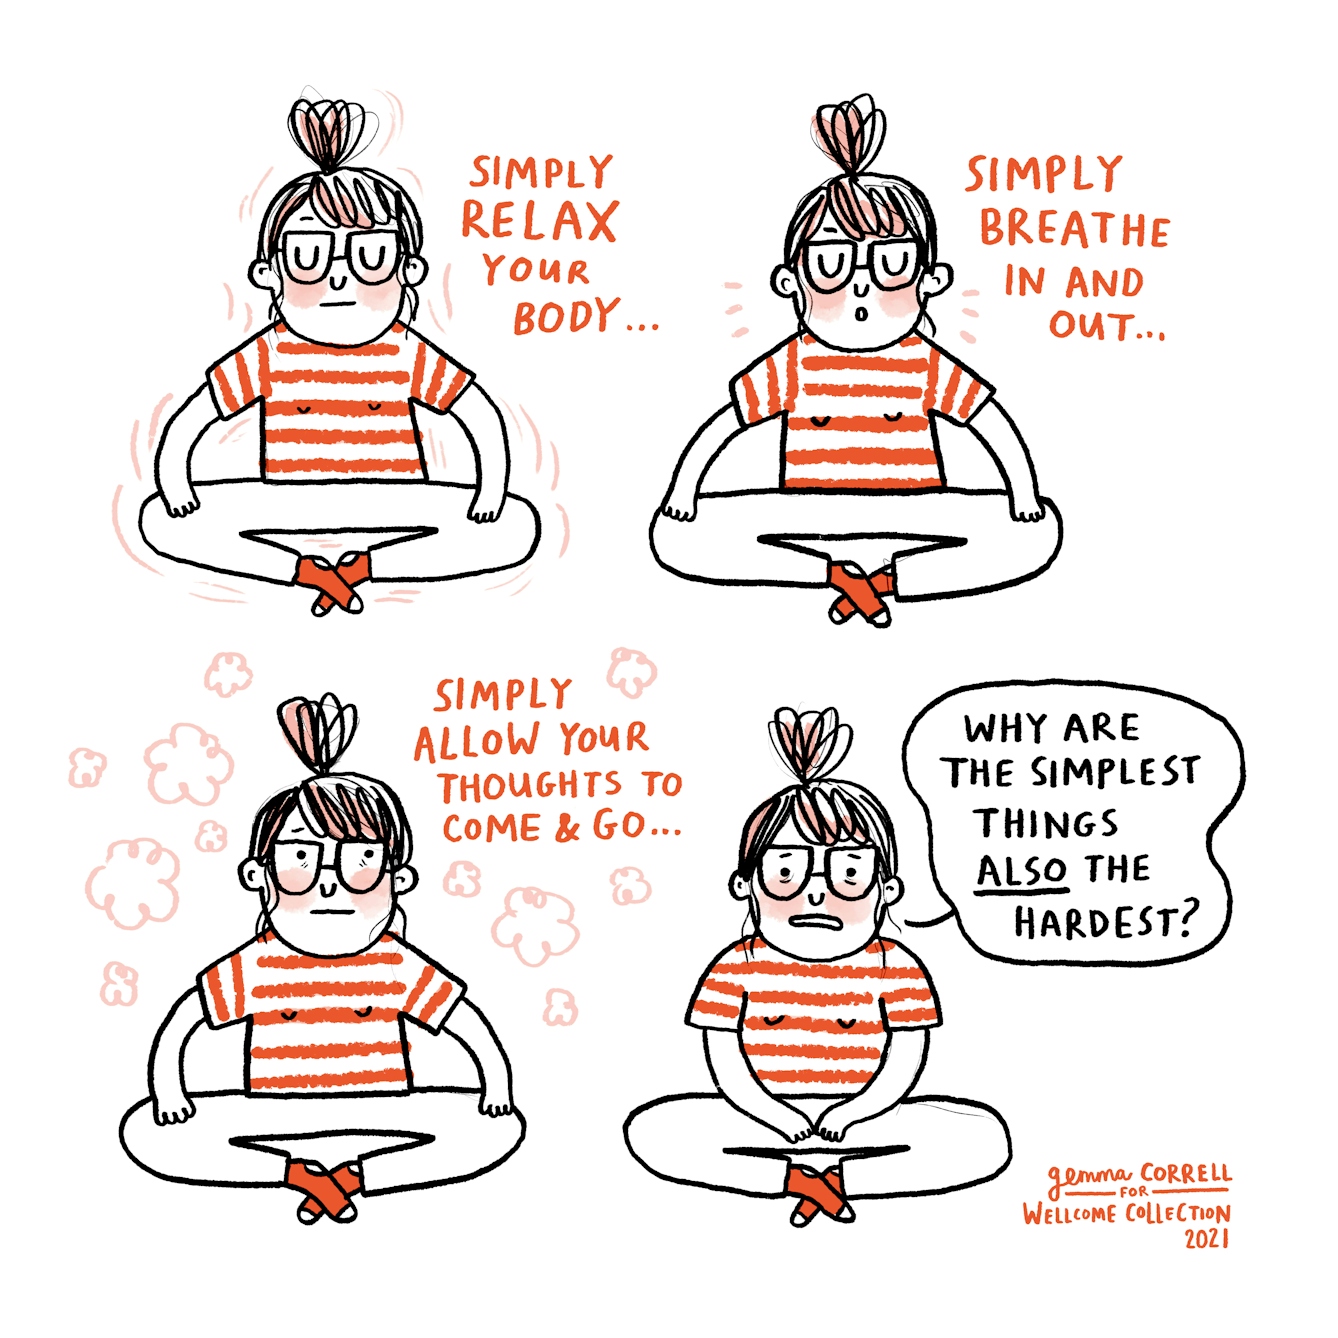 Four illustration frames of a woman with glasses and a striped t-shirt sitting crosslegged trying to meditate.
The first frame shows the woman with her eyes closed and text reading 'simply relax your body'. The second frame shows the woman breathing and text reading 'simply breathe in and out'. The third frame shows the woman surrounded by thought bubbles with her eyes open and text reading 'simply allow your thought to come & go'. The final frame shows the woman looking frustrated and text reading 'why are the simplest things also the hardest?'. 